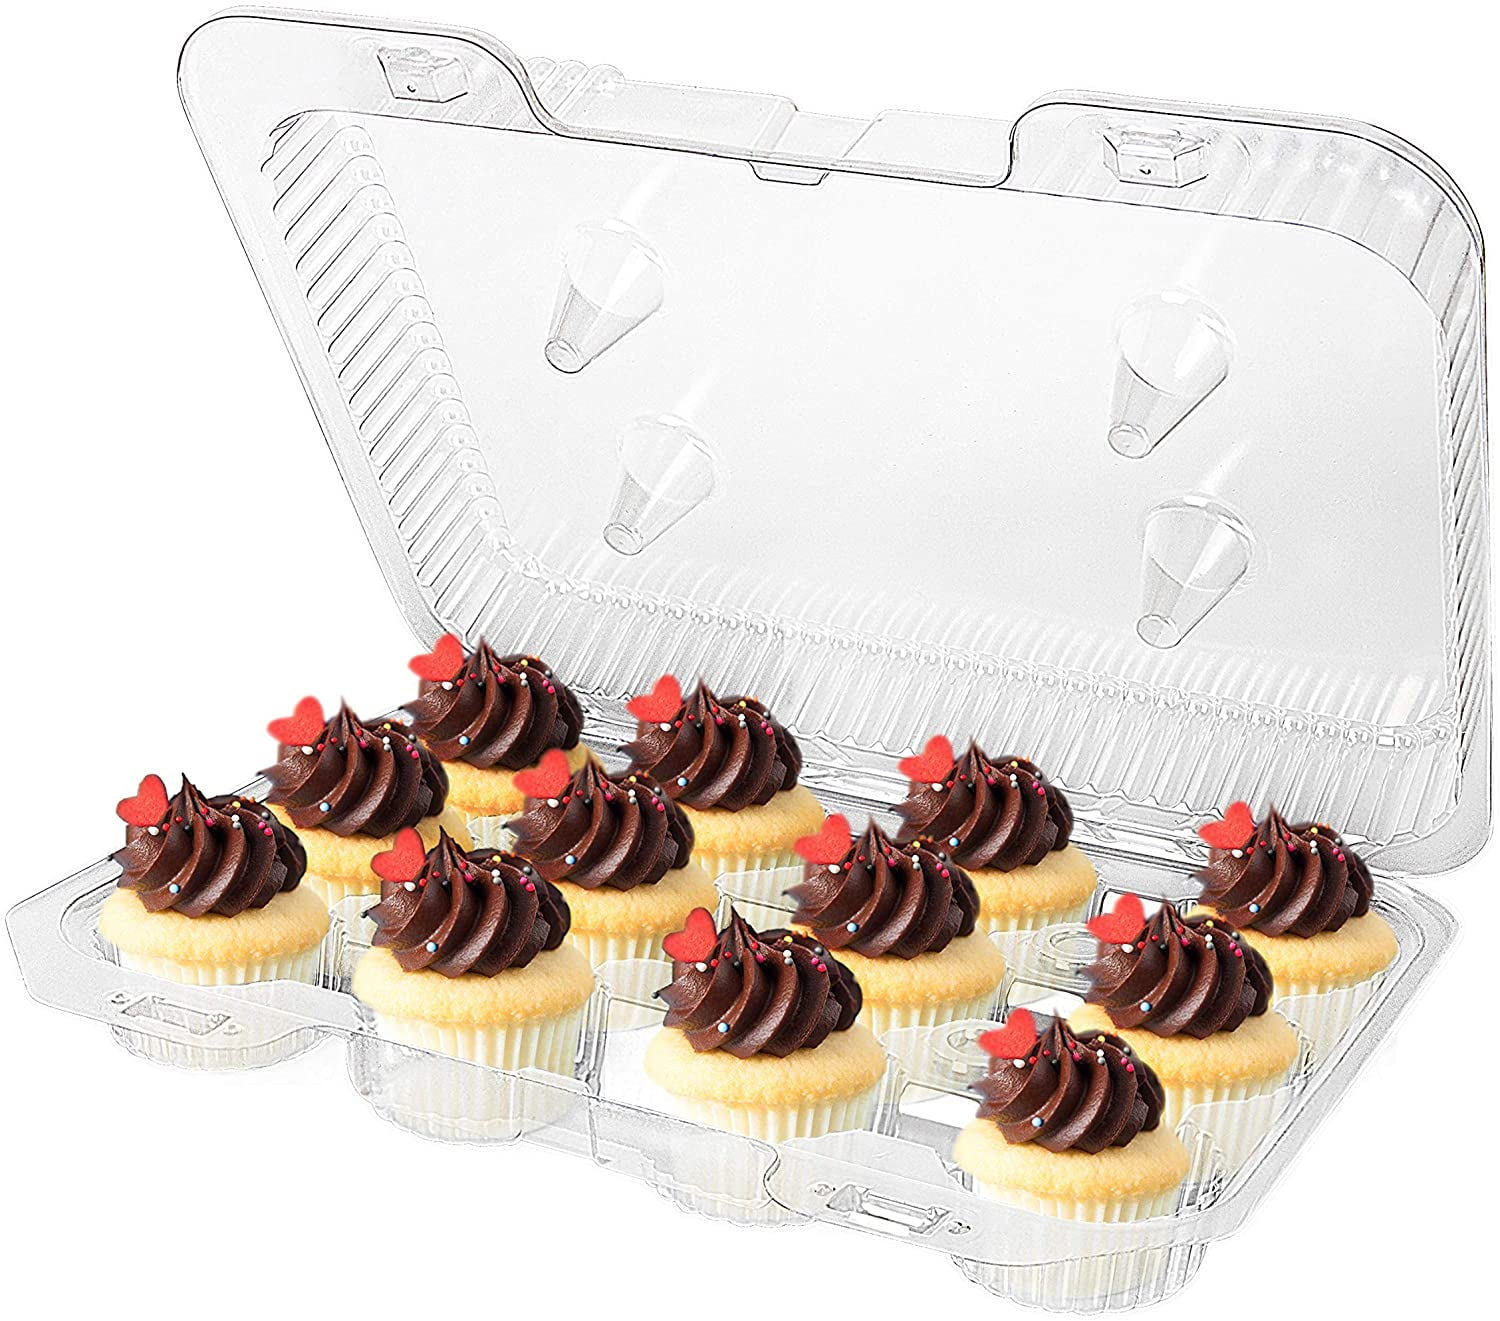 Mini Cupcake Containers: Holds 24 Mini Cupcakes, 11/Pack